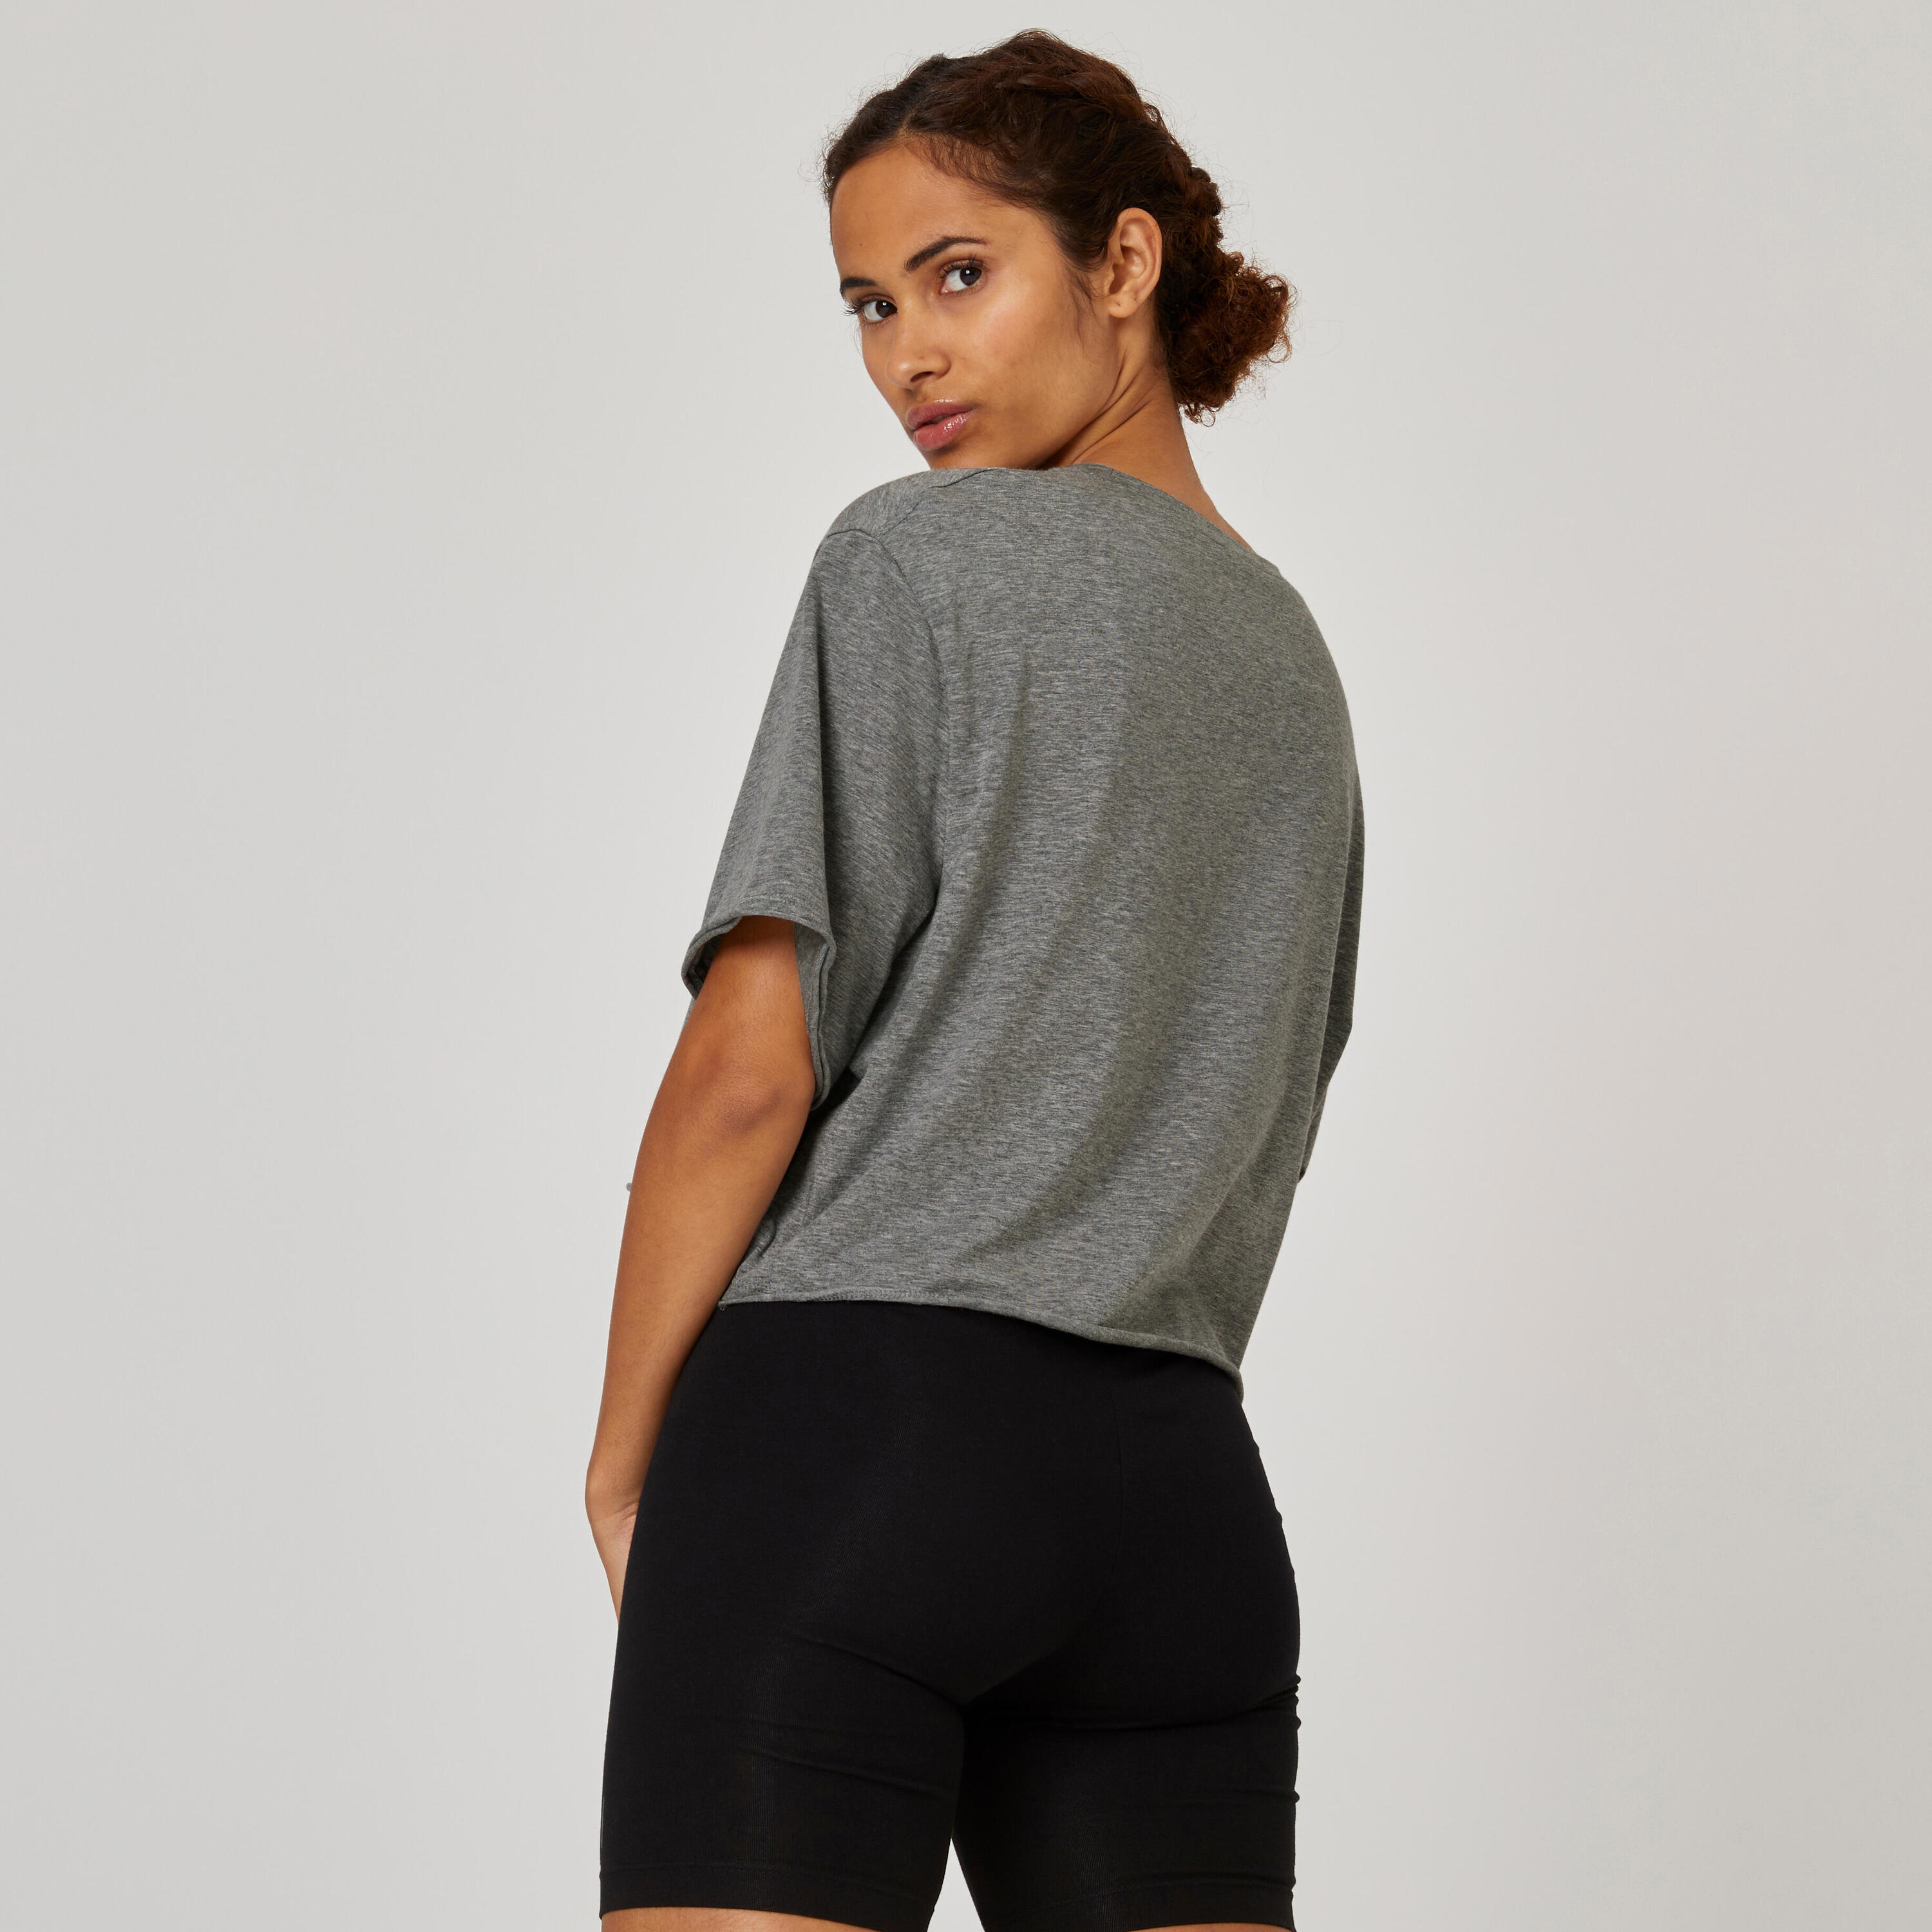 Women's Fitness Cropped T-Shirt 520 - Grey 6/8